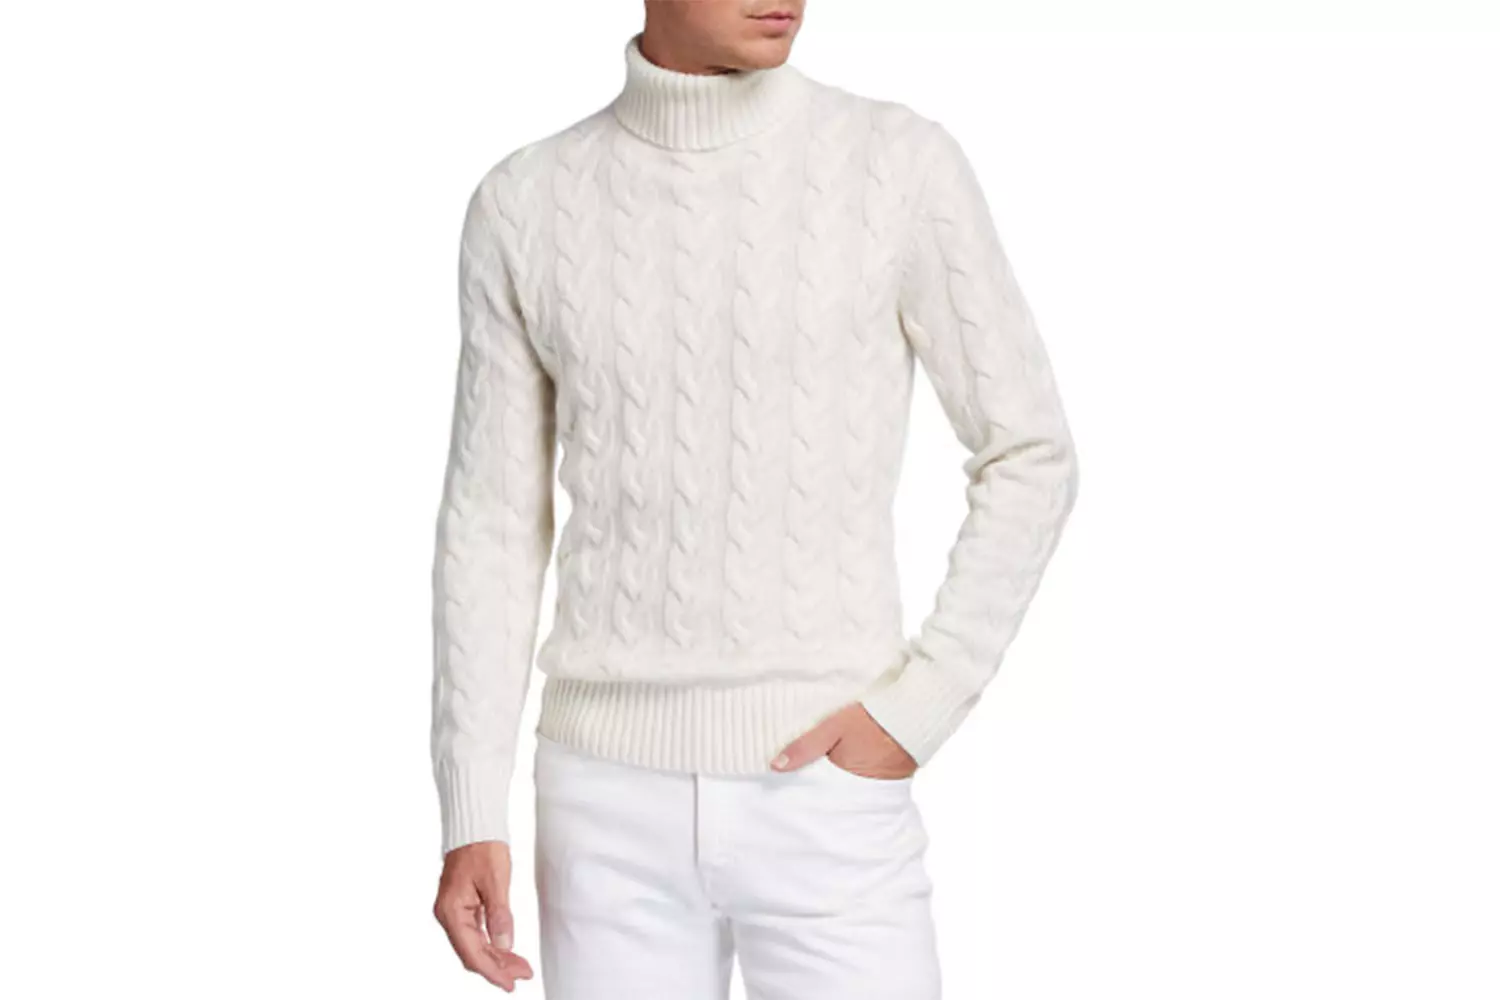 Neiman Marcus Men's Chunky Cable-Knit Turtleneck Sweater